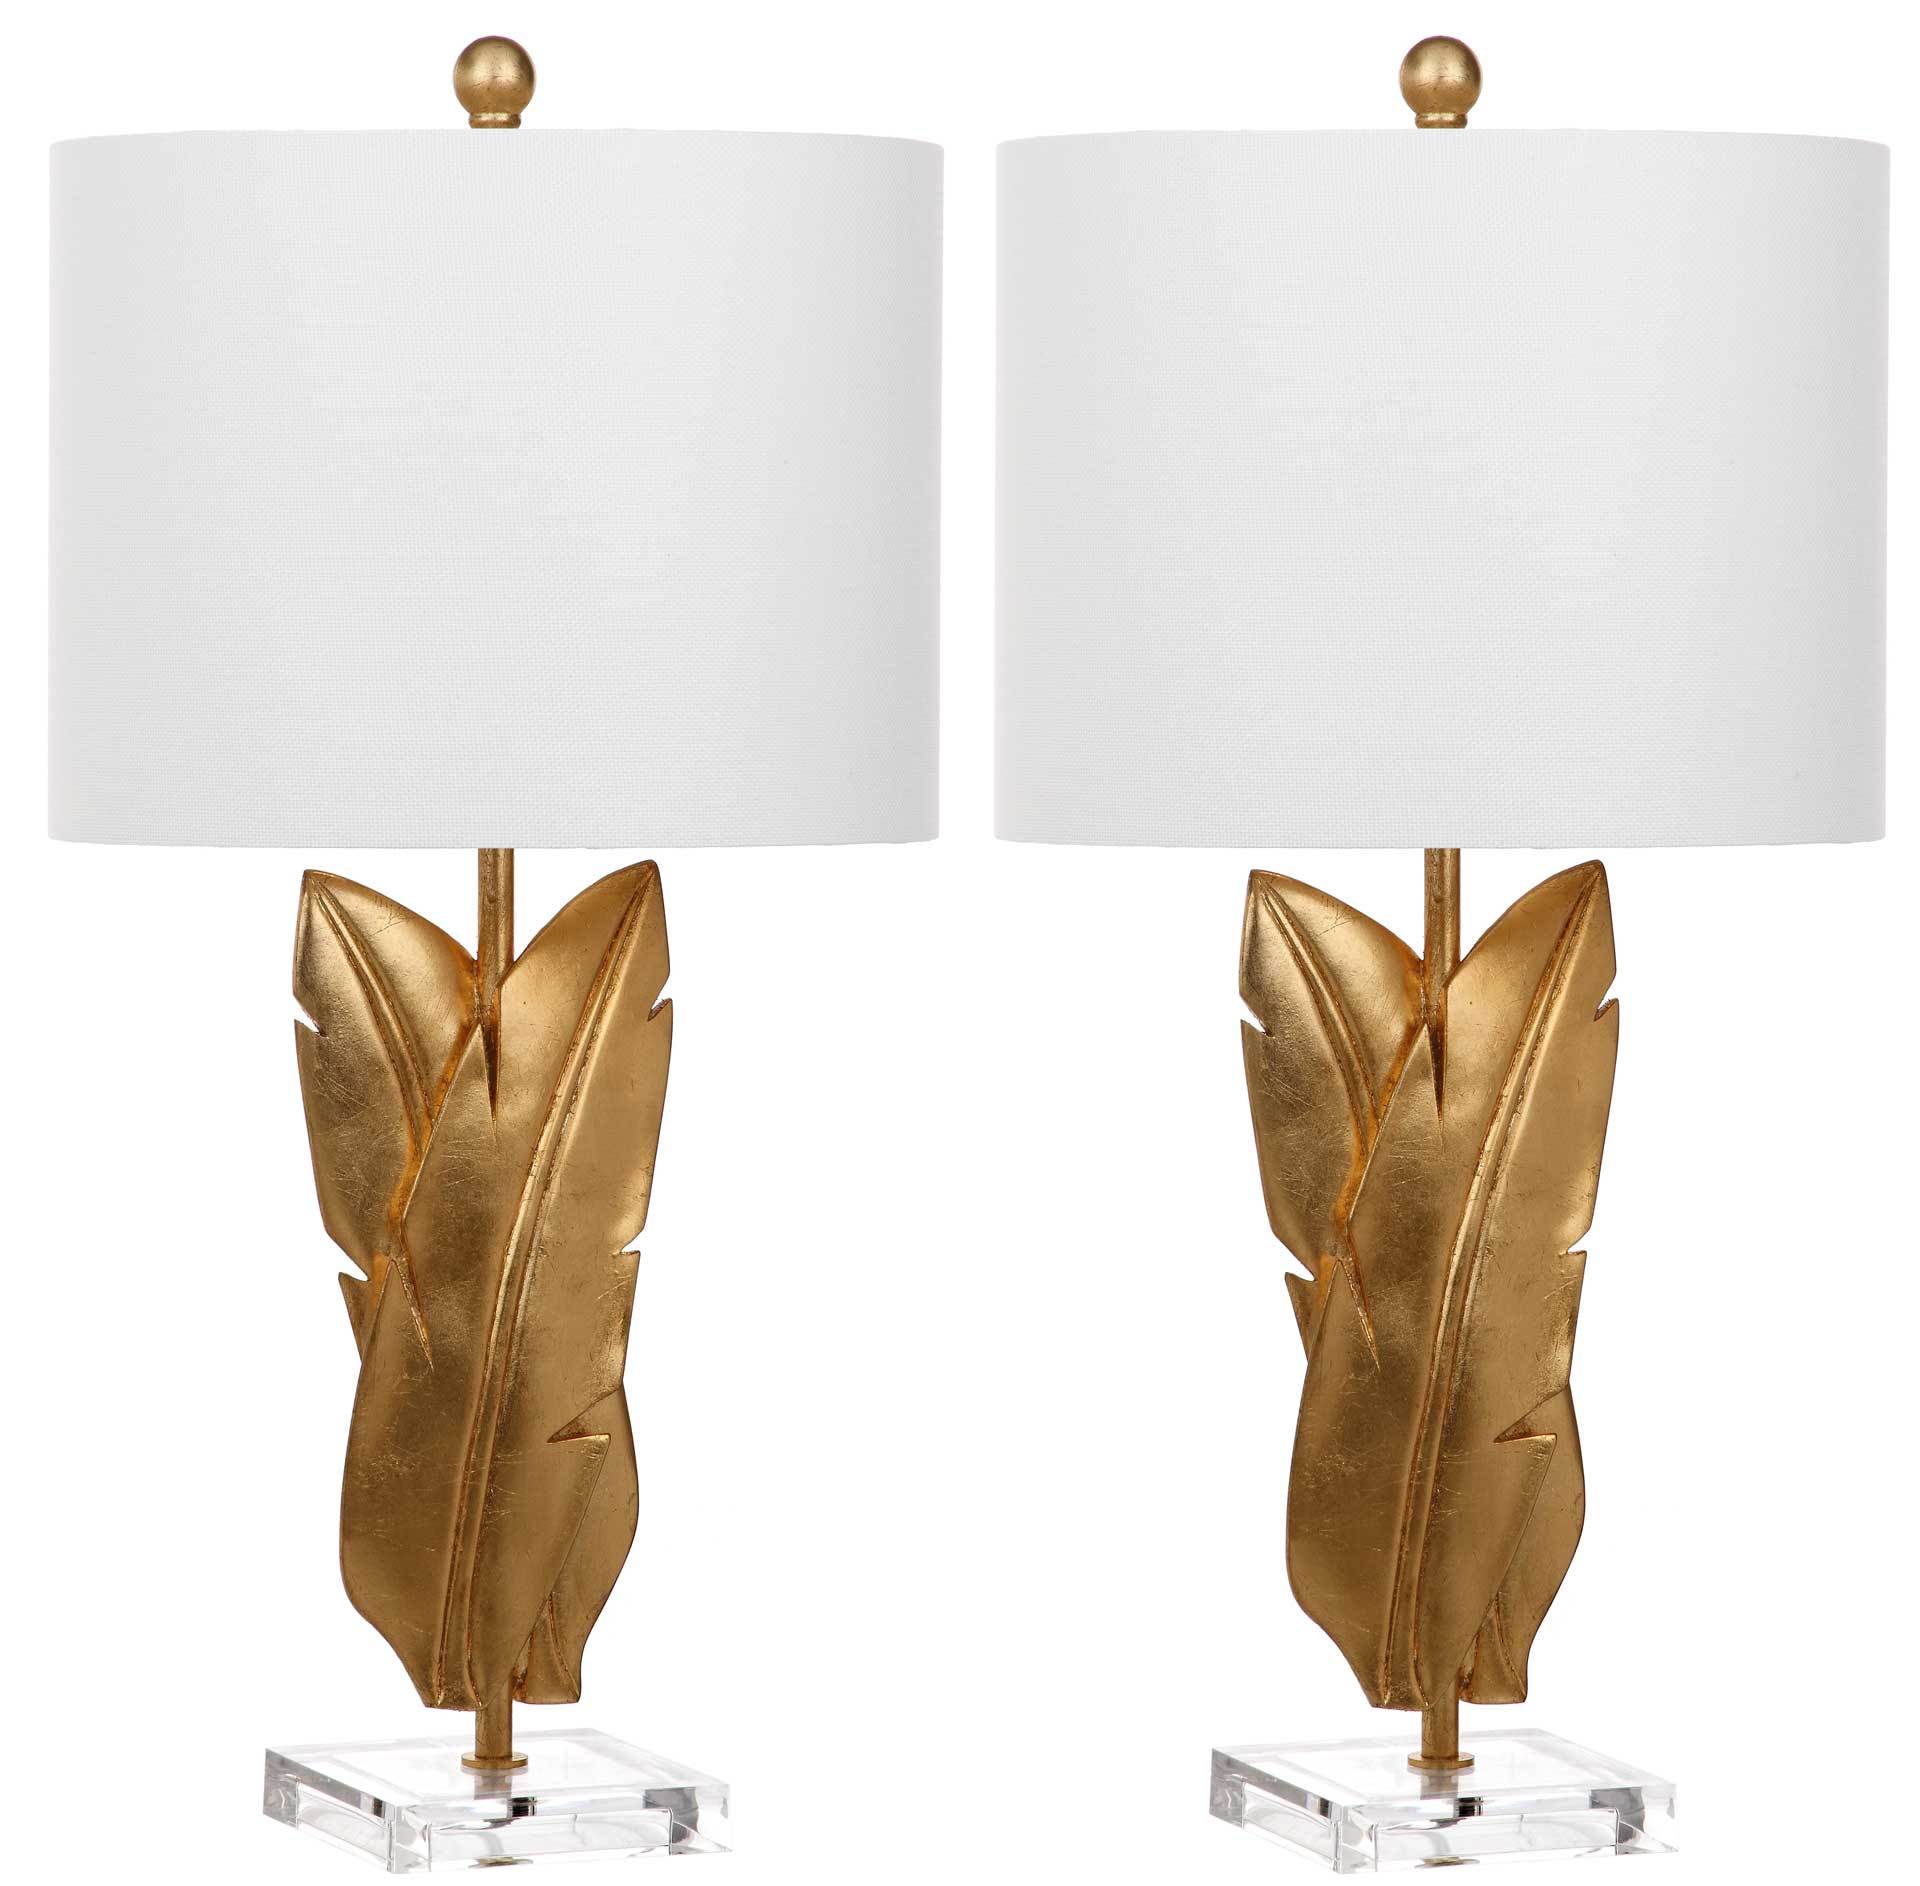 Aerys Wings Table Lamp Gold (Set of 2)